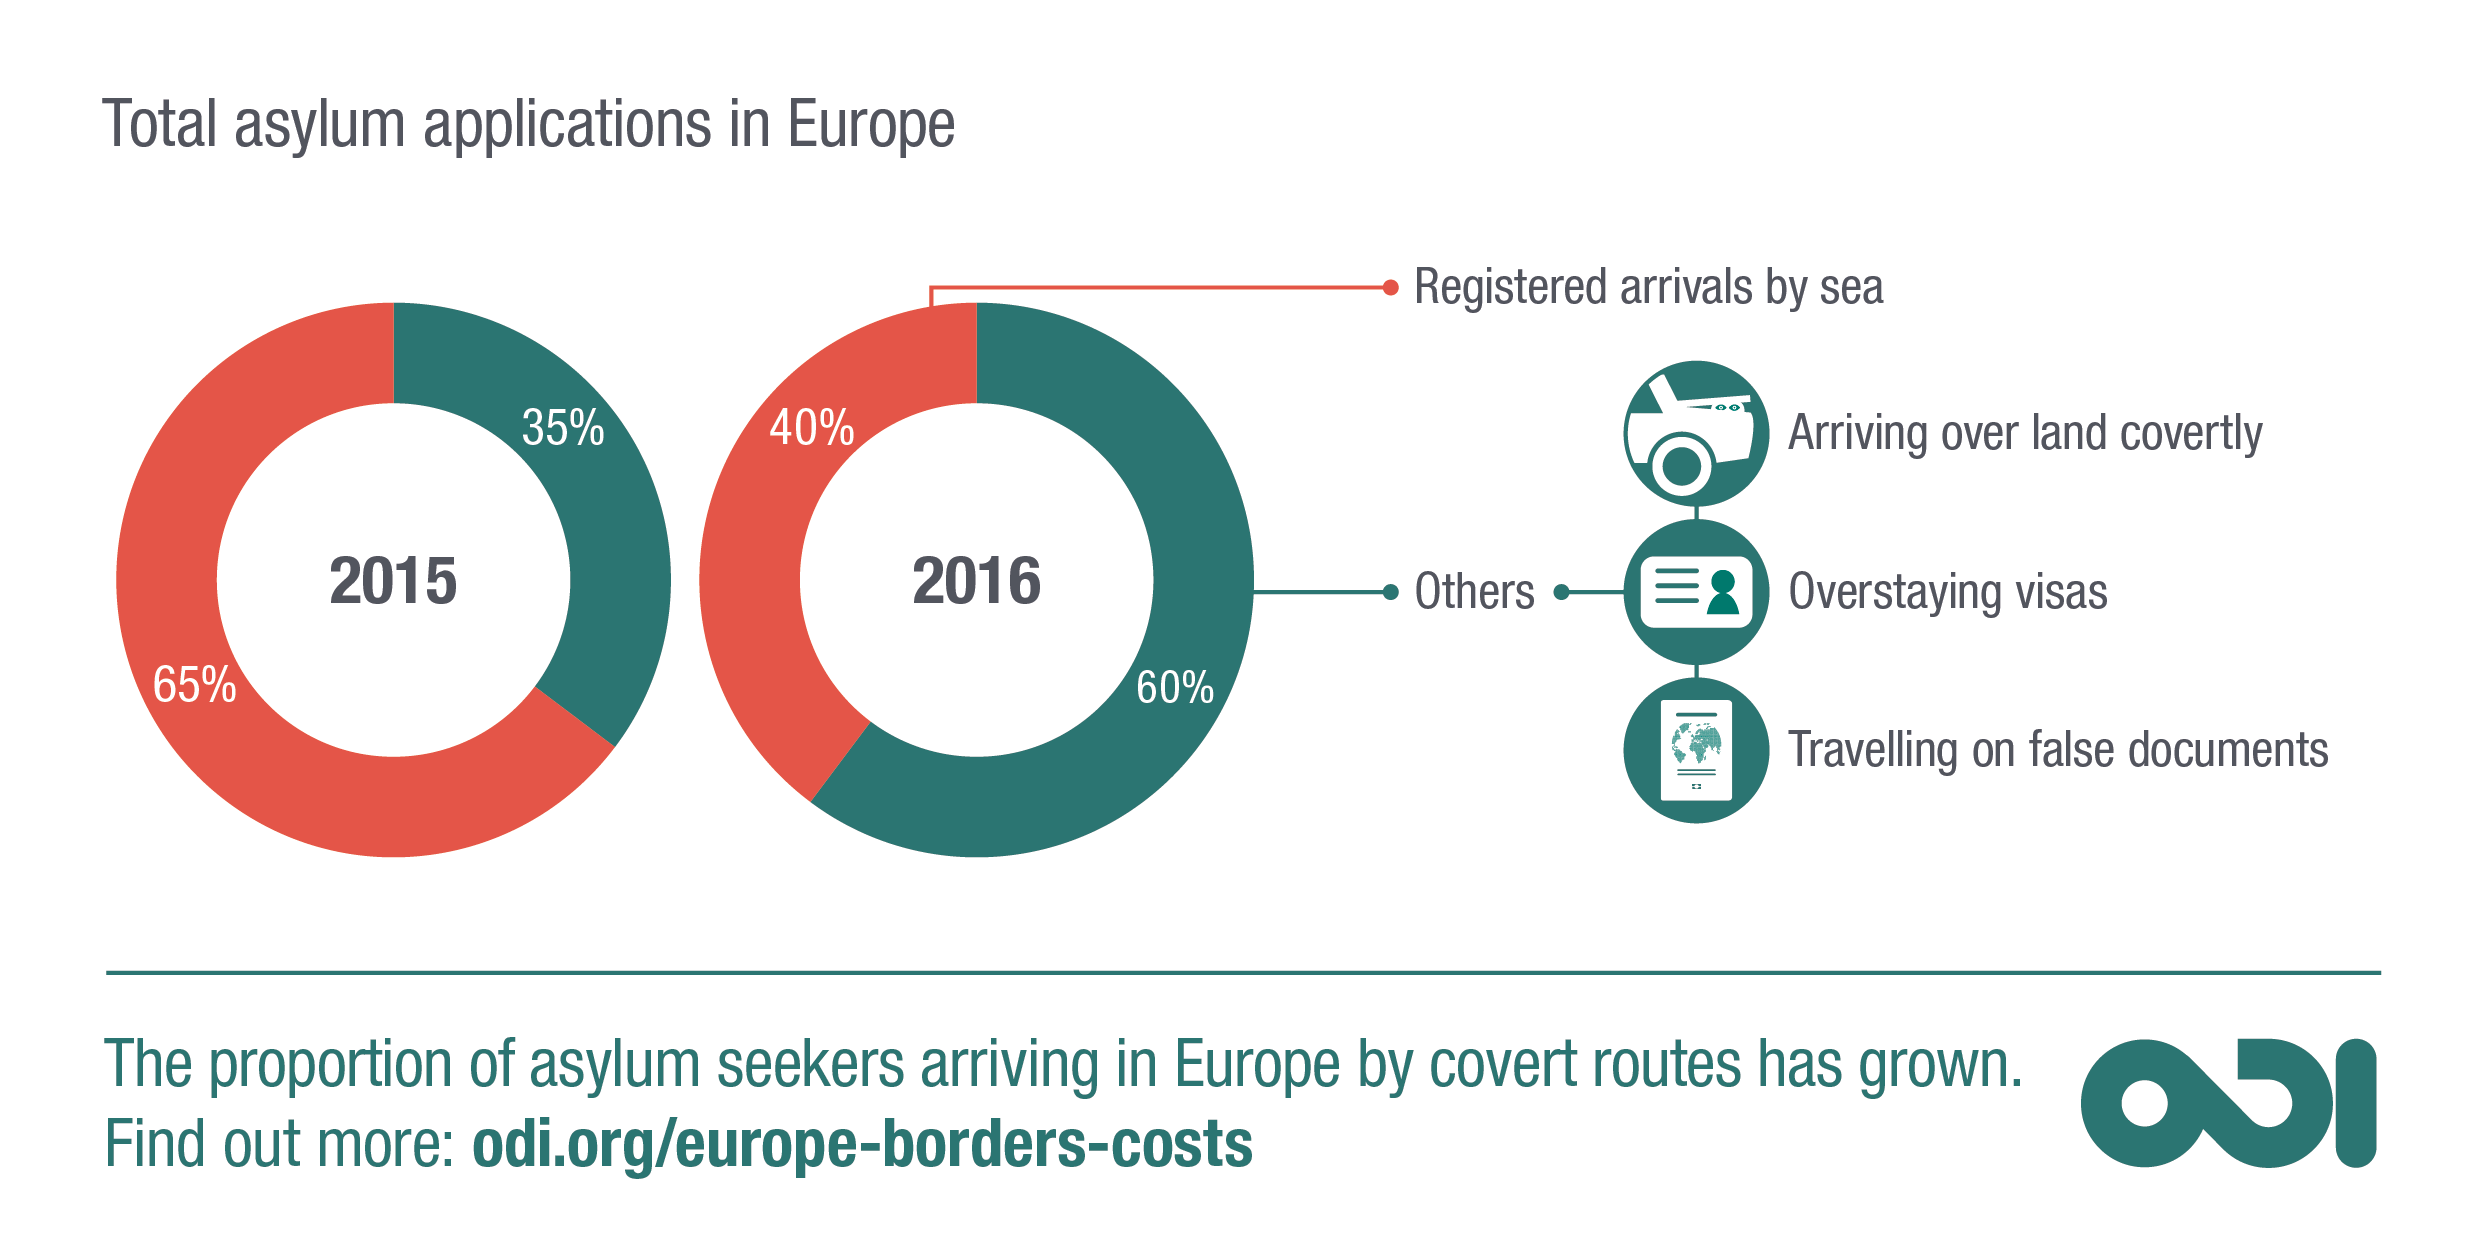 Proportion of asylum seekers arriving in Europe by covert routes has grown.